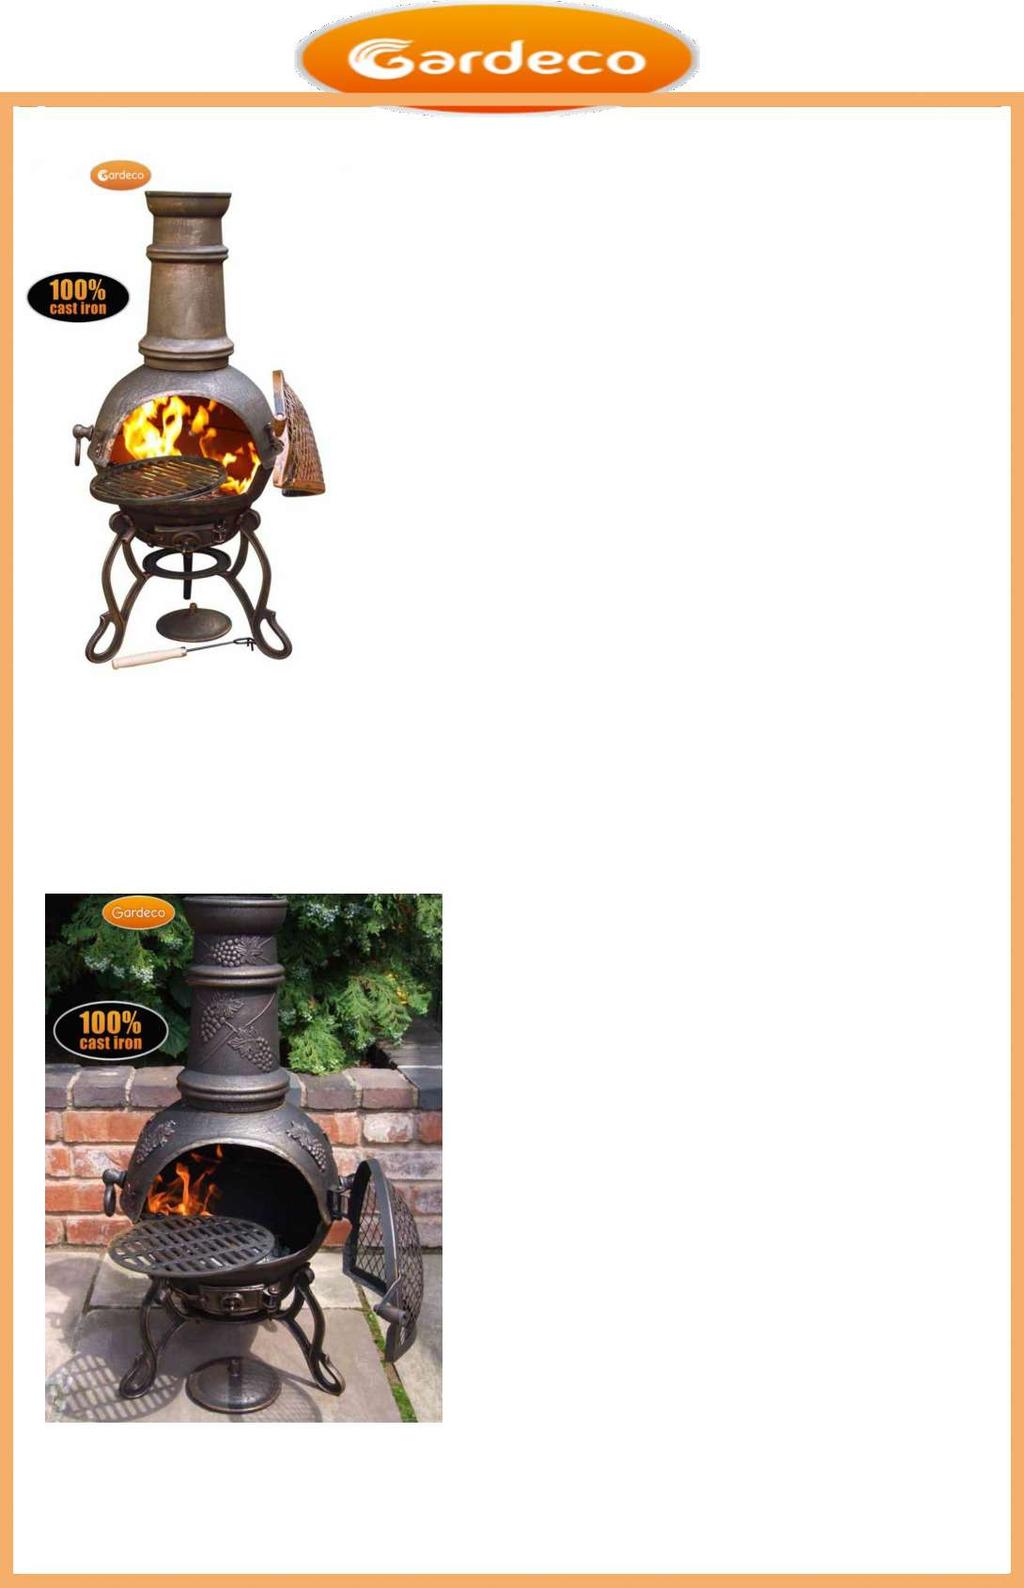 TOLEDO CAST IRON CHIMENEA Features: Size: 40cm diameter x 98cm high 100% cast iron Strong and durable, long-lasting Supplied with swivel cast iron BBQ grill with balcony Hinged mesh door, rain lid,